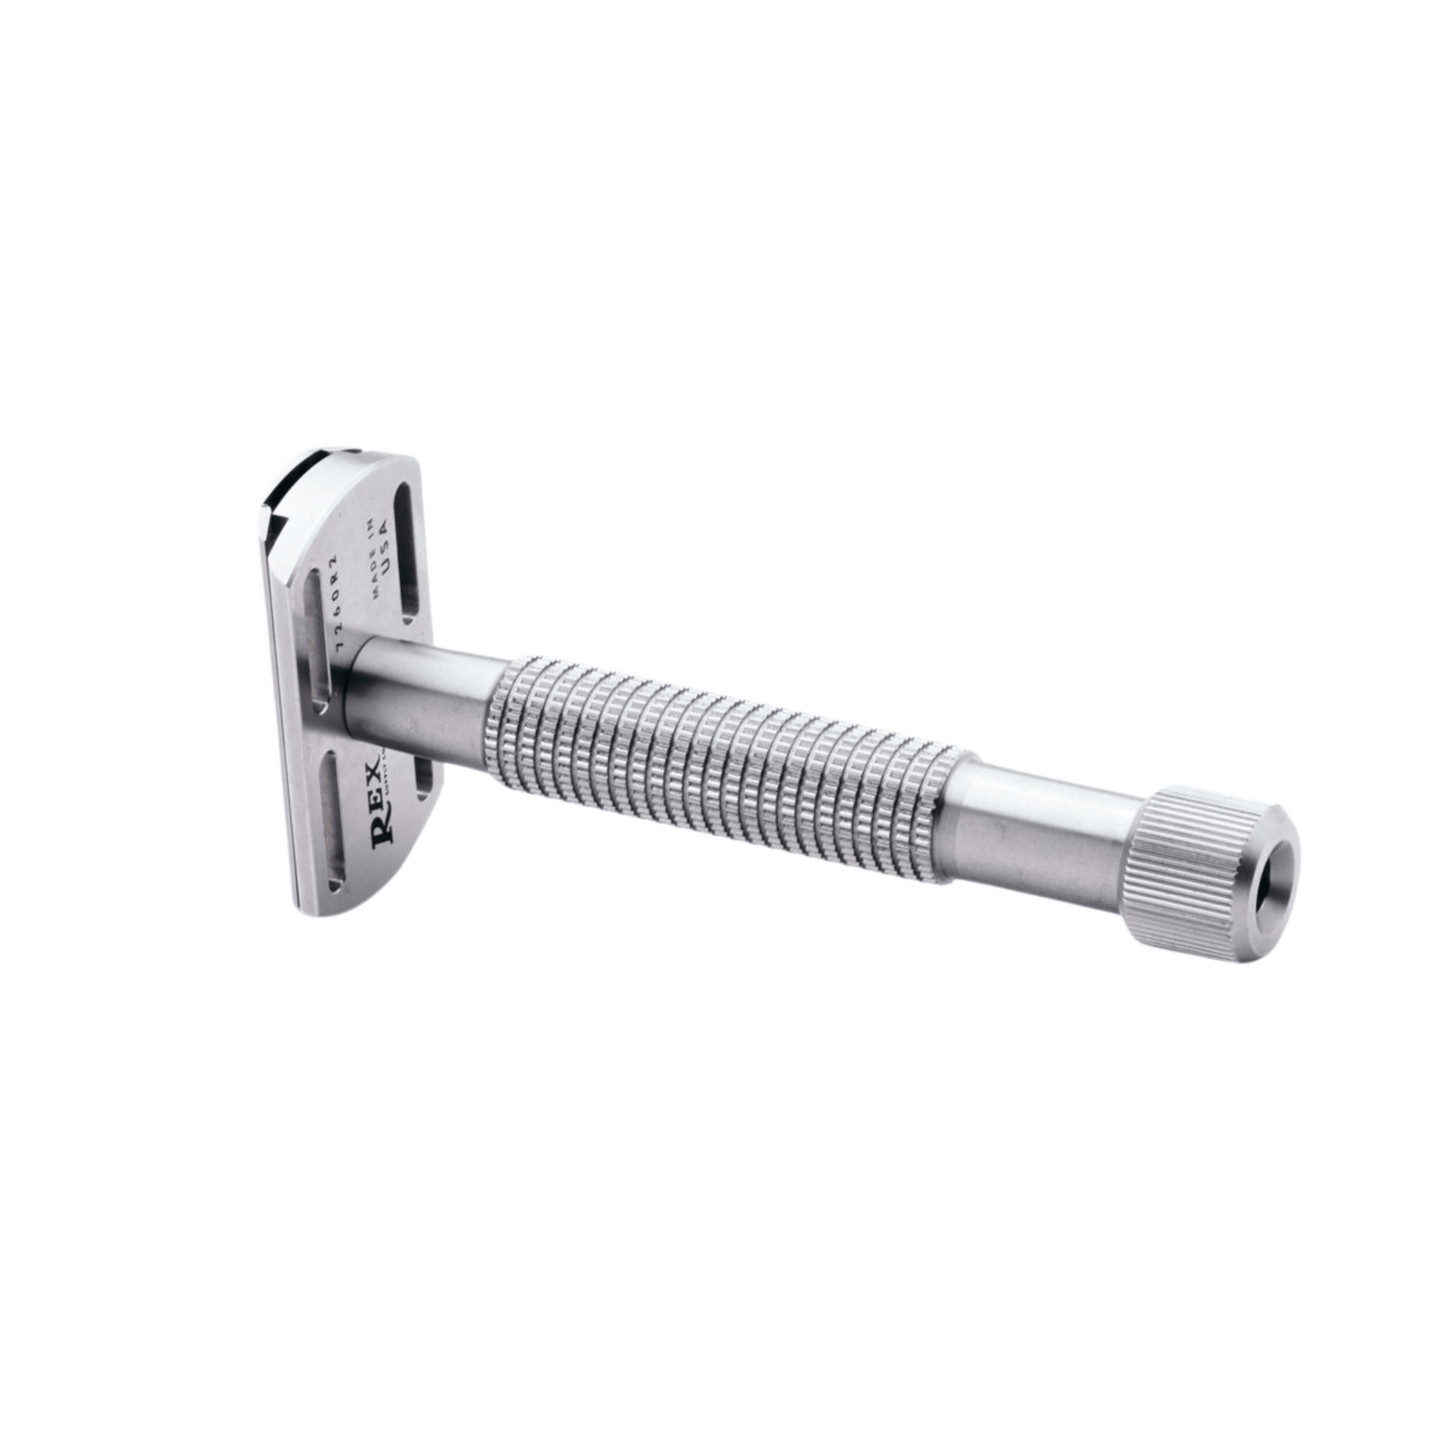 Primary Image of Envoy XL Stainless Steel Safety Razor